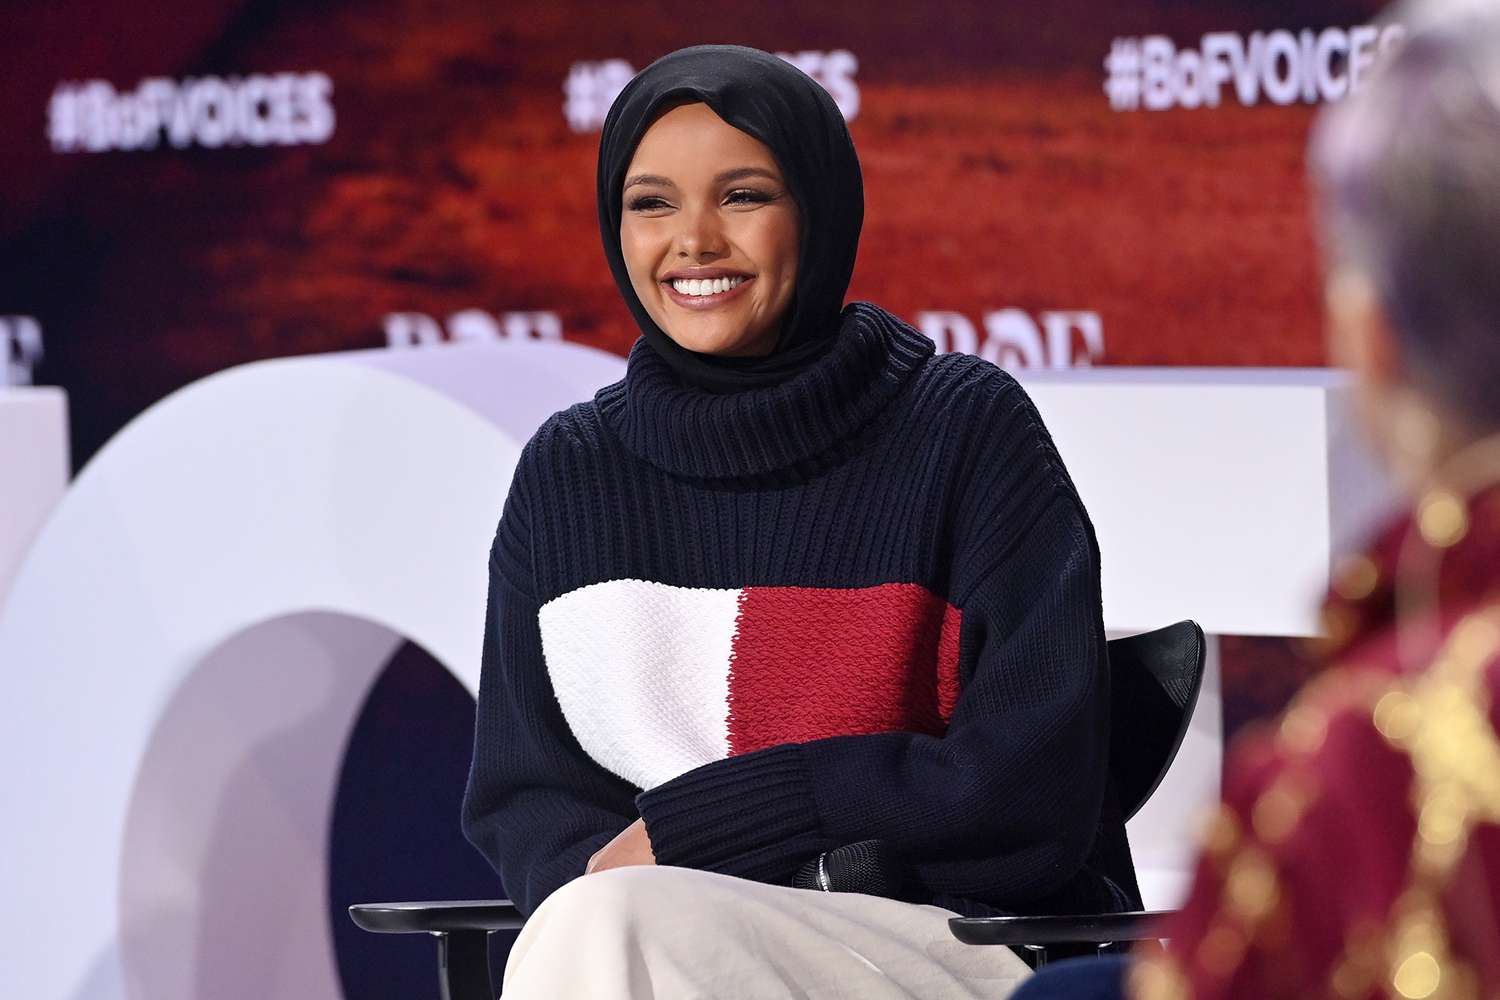 OXFORDSHIRE, ENGLAND - DECEMBER 02: Halima Aden speaks during BoF VOICES 2021 at Soho Farmhouse on December 02, 2021 in Oxfordshire, England. (Photo by Samir Hussein/Getty Images for BoF VOICES)